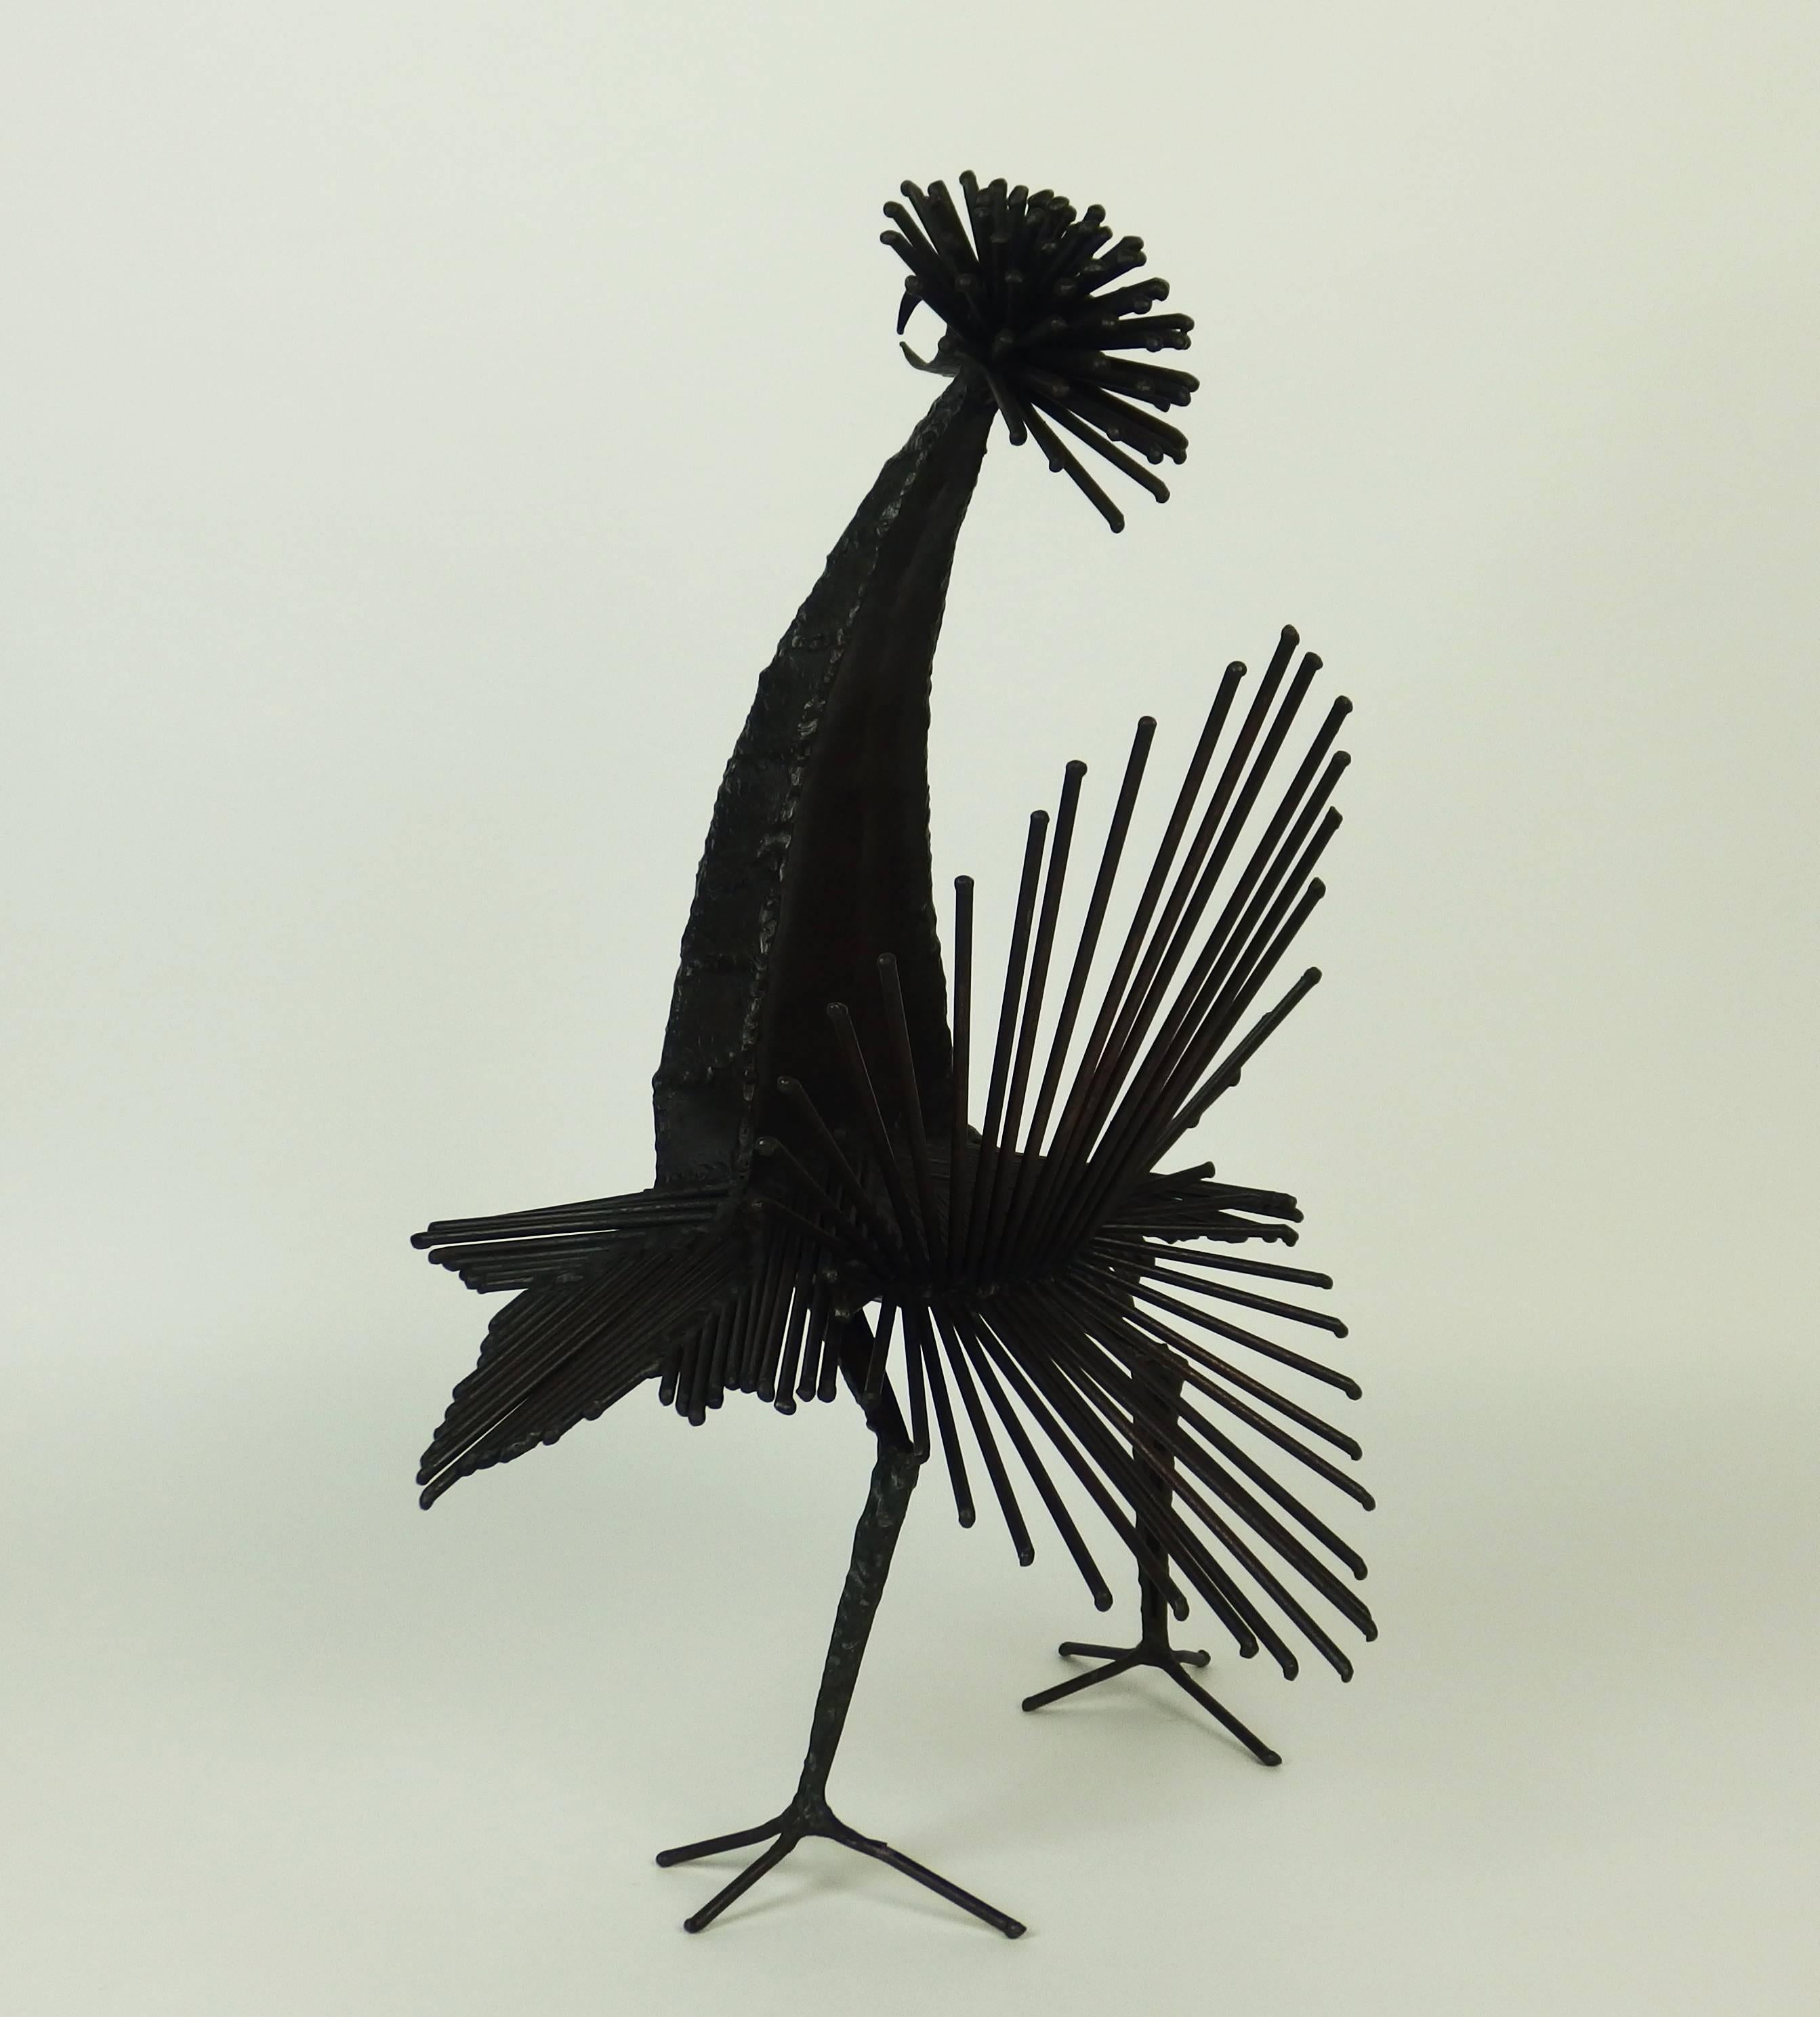 The rooster was created in the mid-1960s by the ceramist and sculptor Michel Anasse. This sculpture, made with patinated welded iron rods and hammered metal sheets, is representative of the use of metal in Anasse sculpted works.